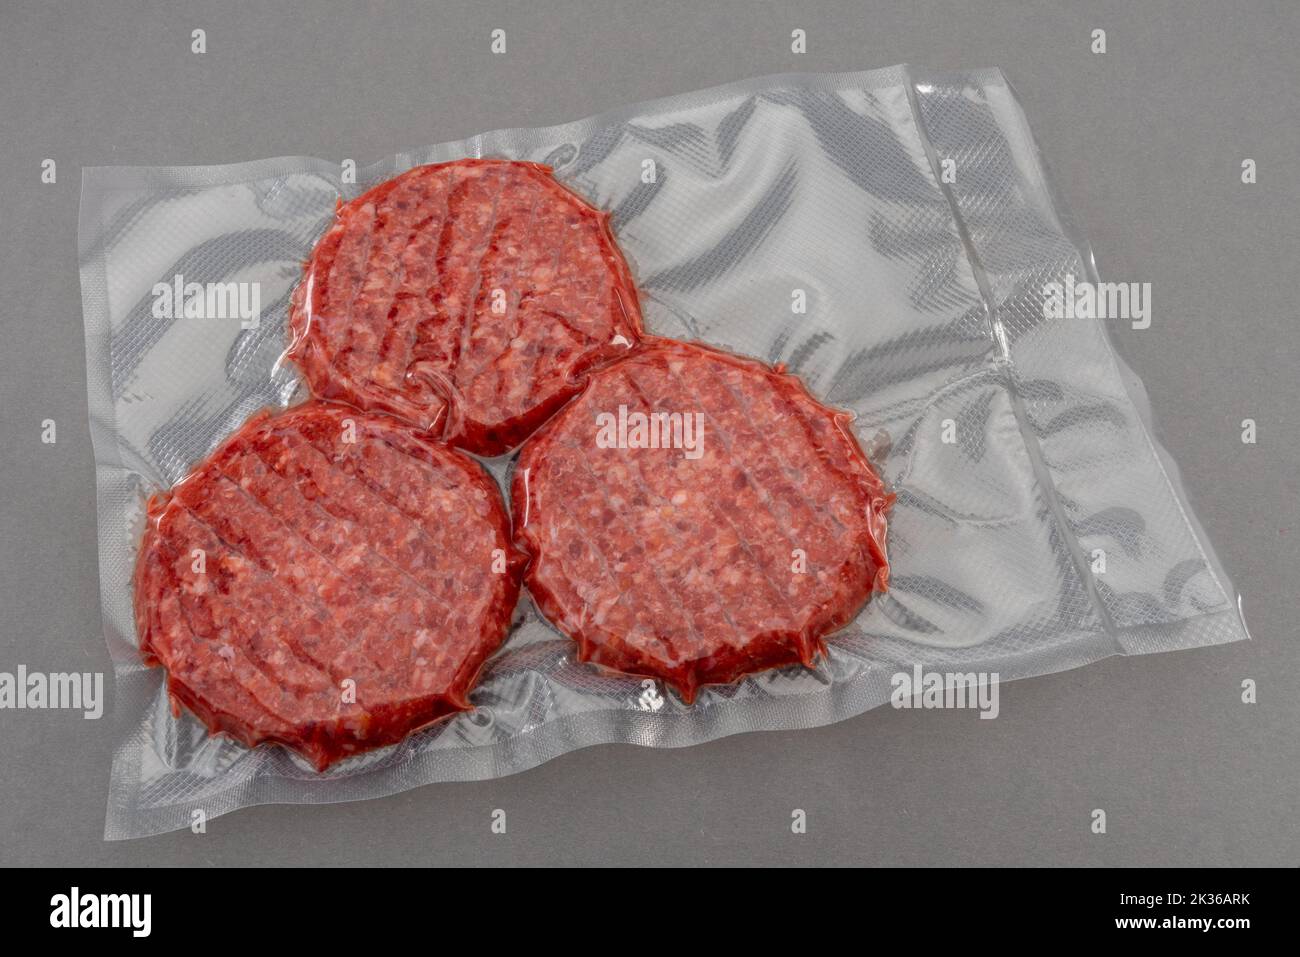 Raw burger meat for hamburger in vacuum packed sealed for sous vide cooking isolated on gray background Stock Photo